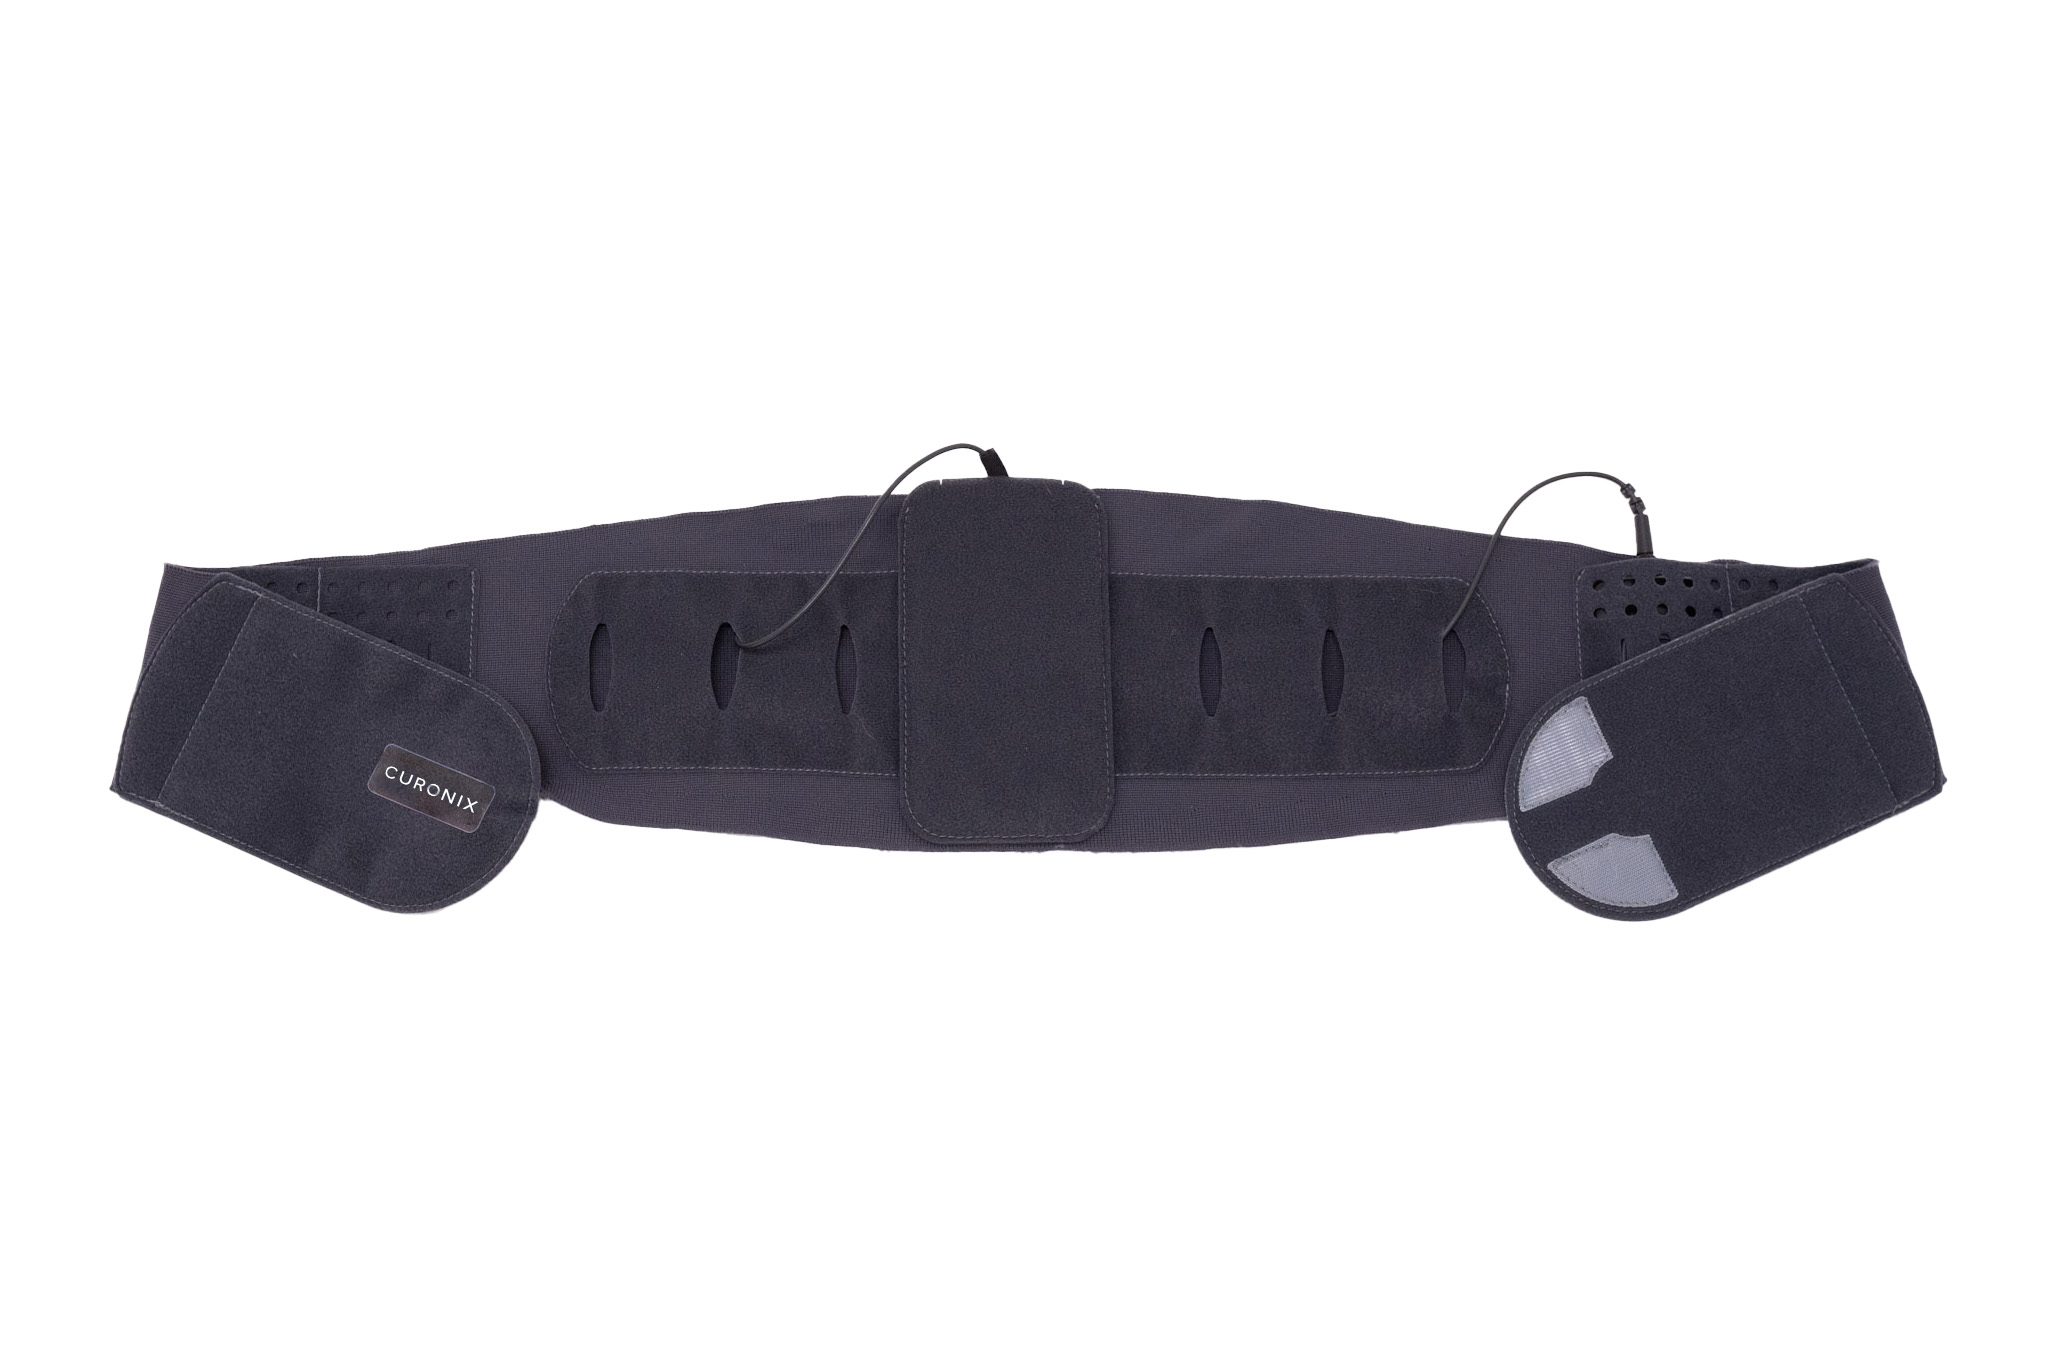 Spinal Cord Stimulation torso wearable, made by Curonix.